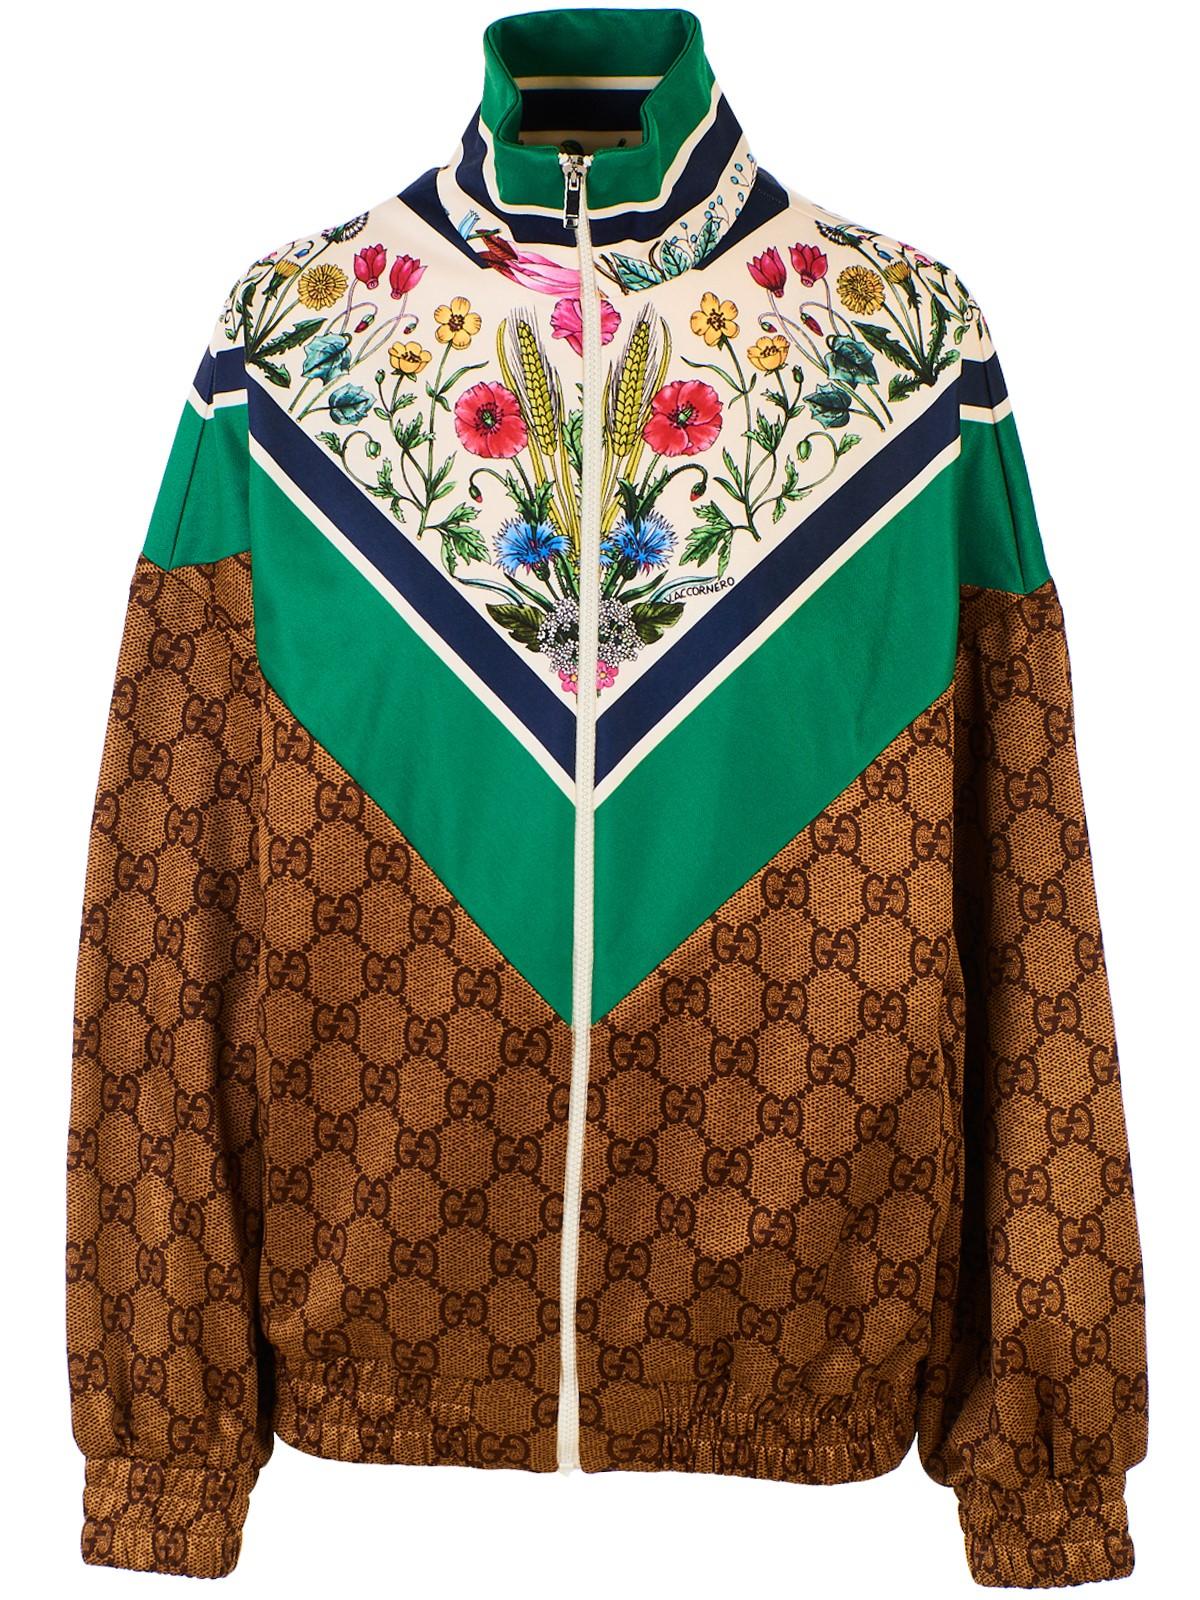 Gucci GG Supreme Track Jacket in Natural - Lyst